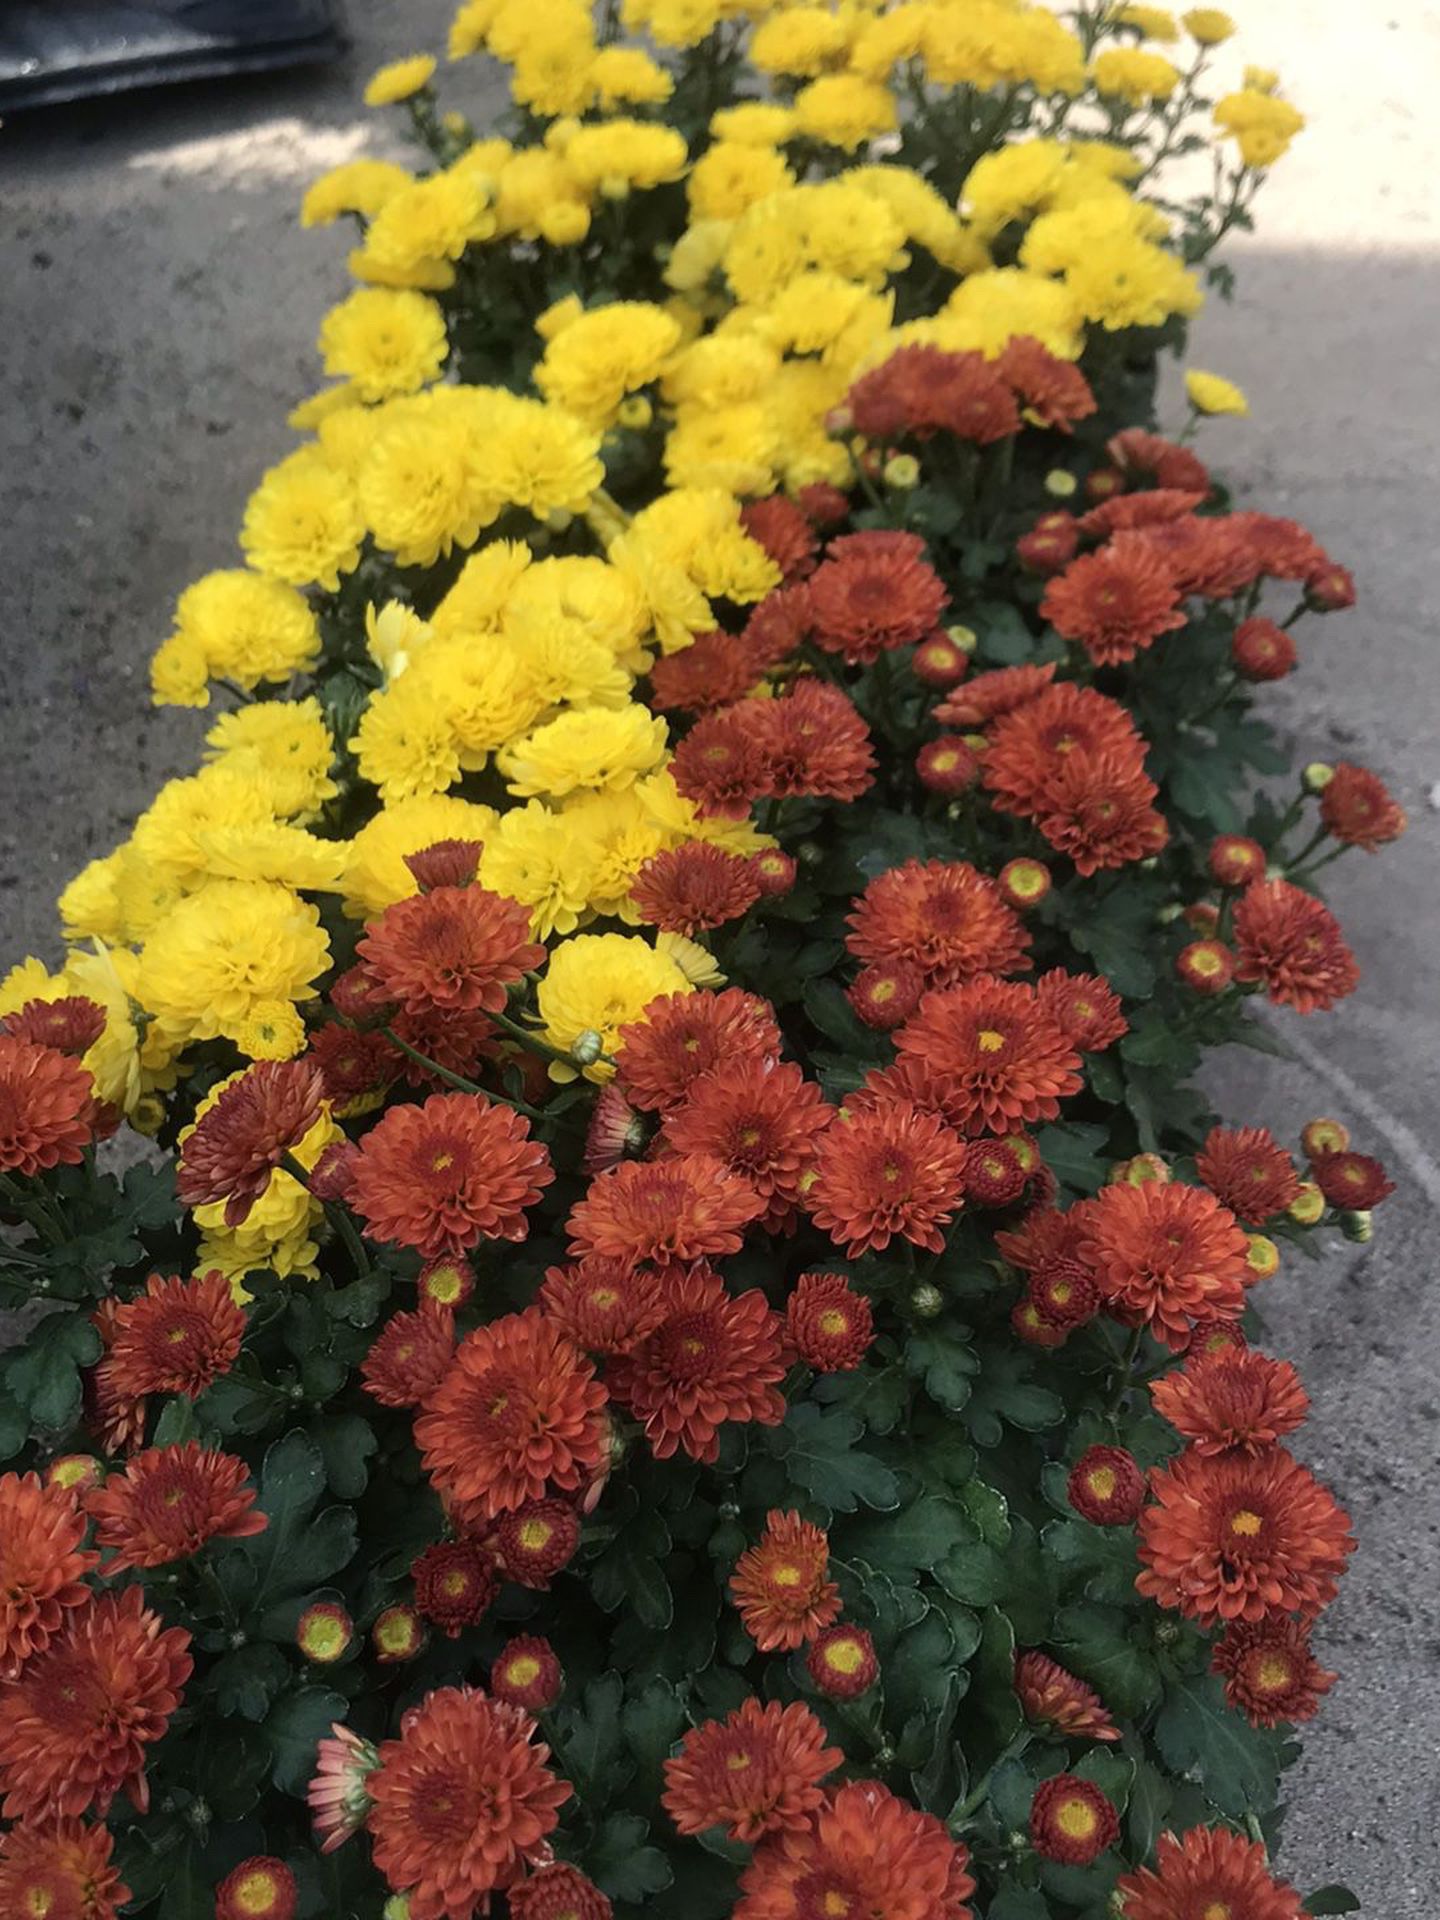 Beautiful perennial Mums potted flowers in orange/brown, purple, white and bright yellow colors